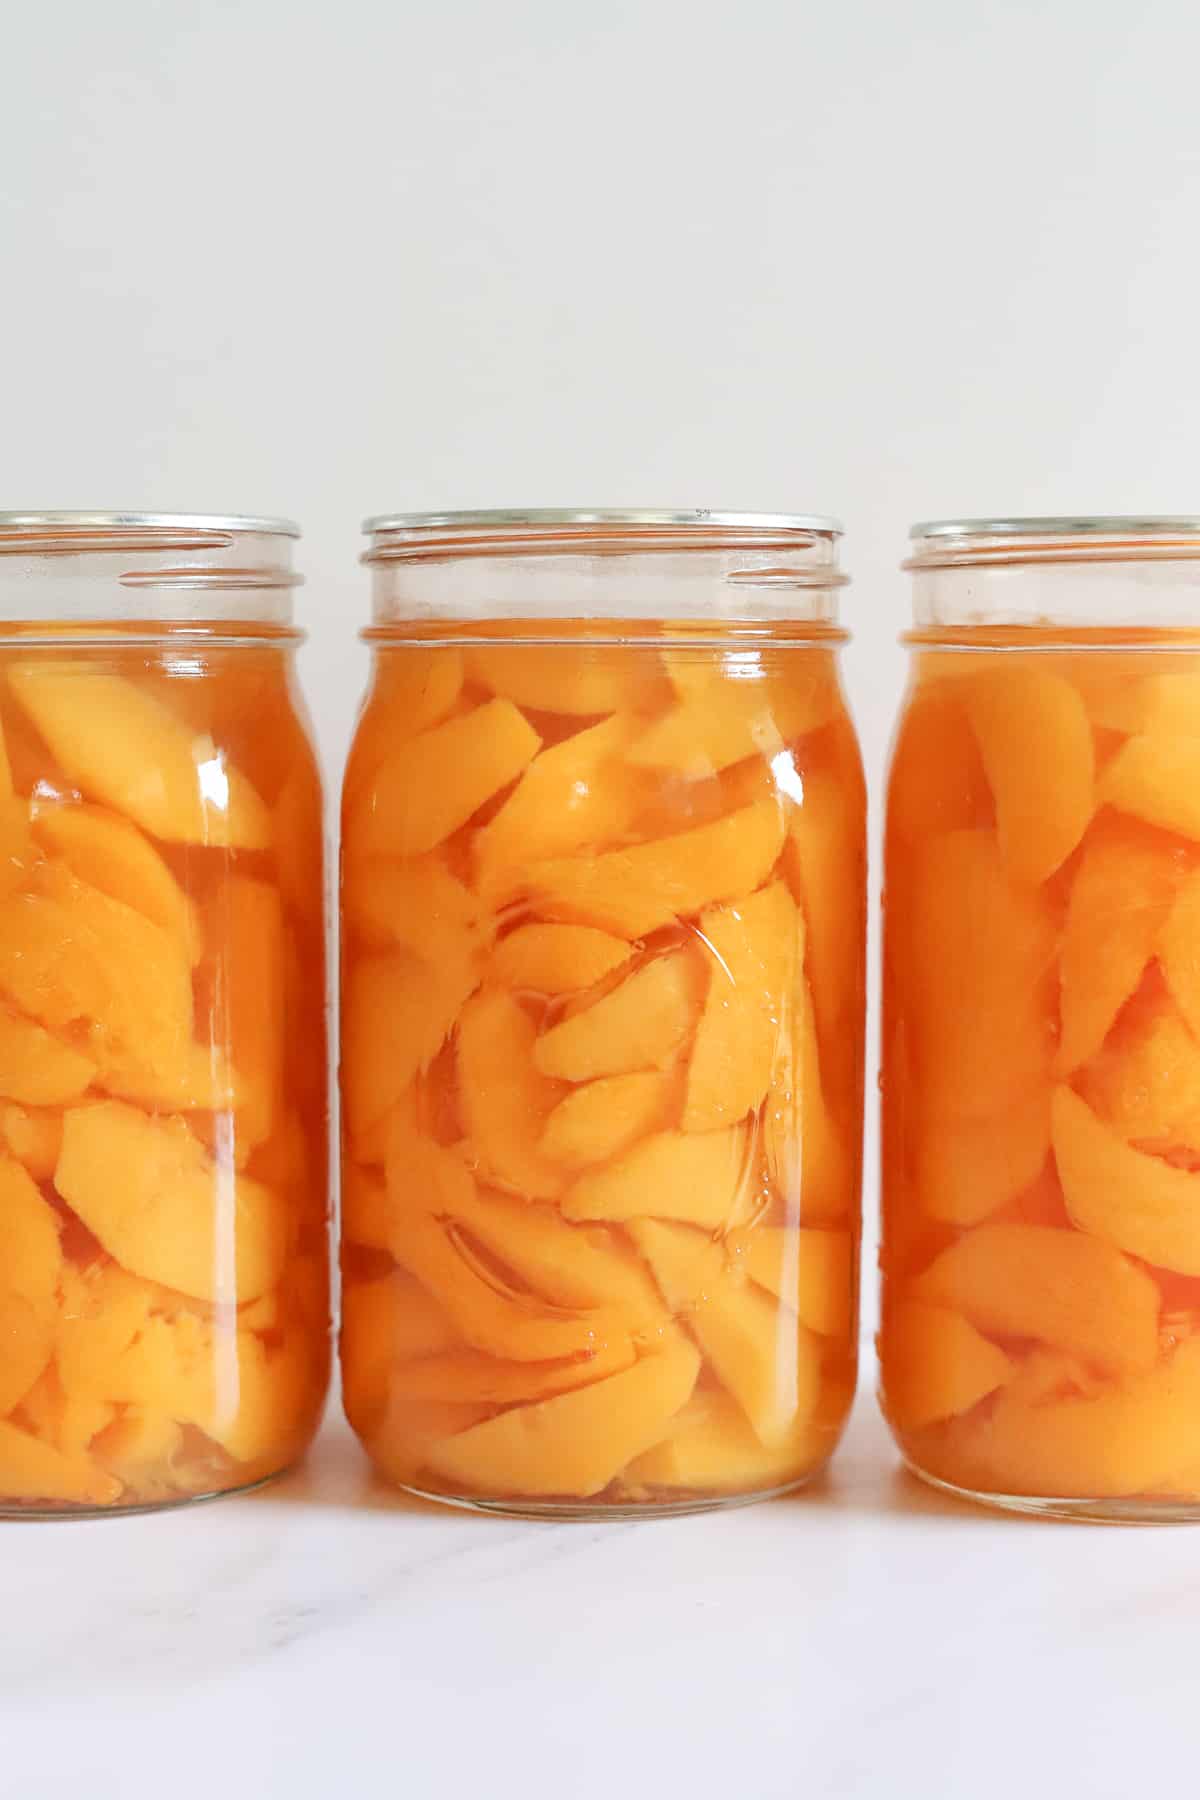 3 quart jars of peaches on a white background